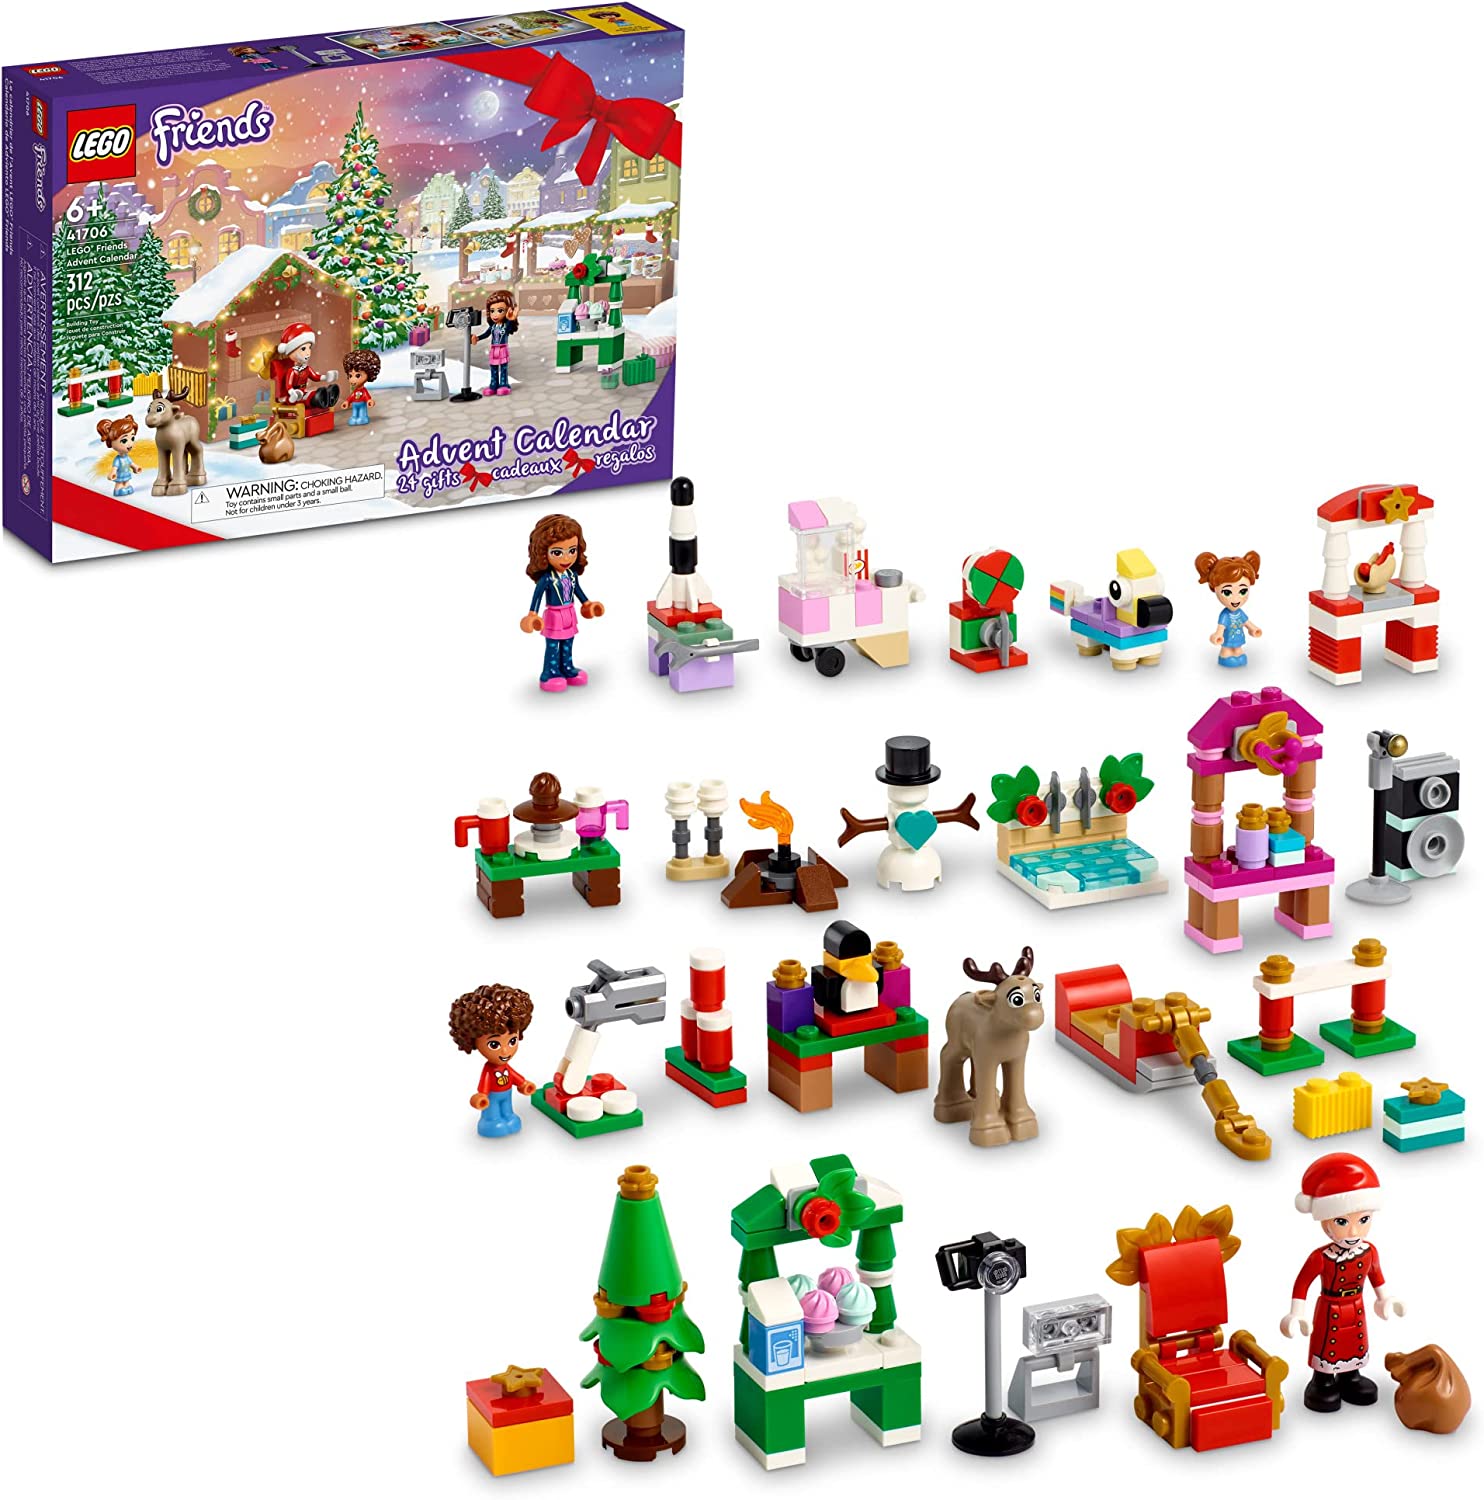 LEGO Friends 2022 Advent Calendar 41706 Building Toy Set; 24 Gifts and Holiday Toys, Including Santa’s Sleigh; for Kids, Boys and Girls, Ages 6+ (312 Pieces)L $22.39